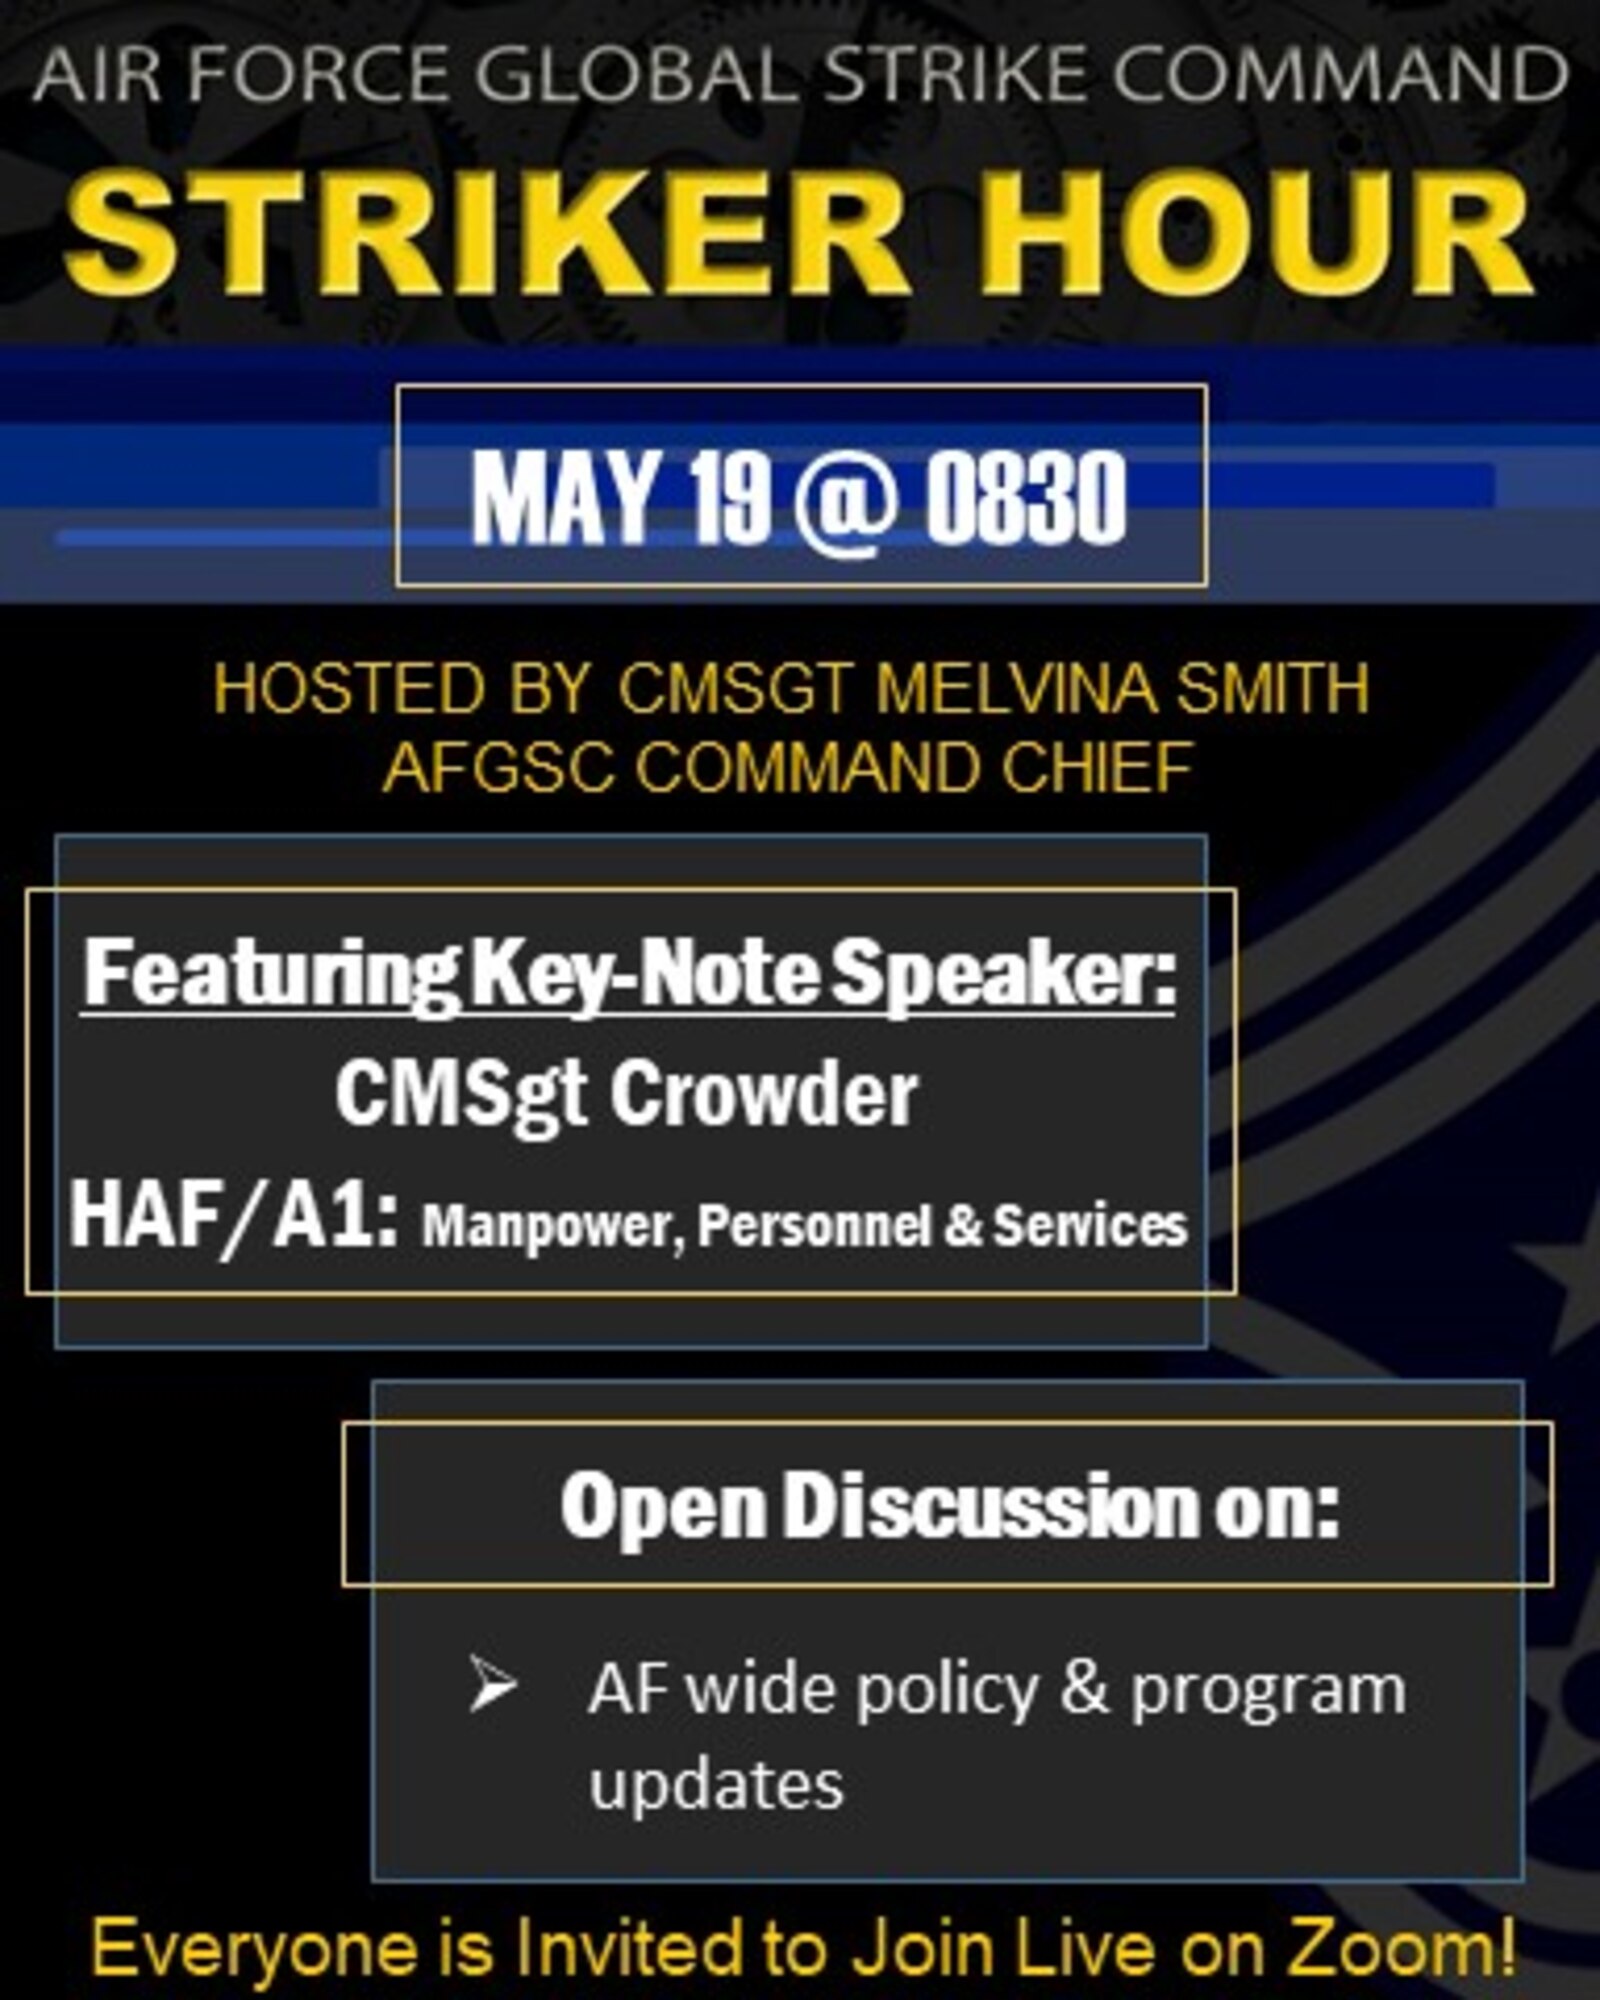 Graphic of May 2022 Striker Hour event information